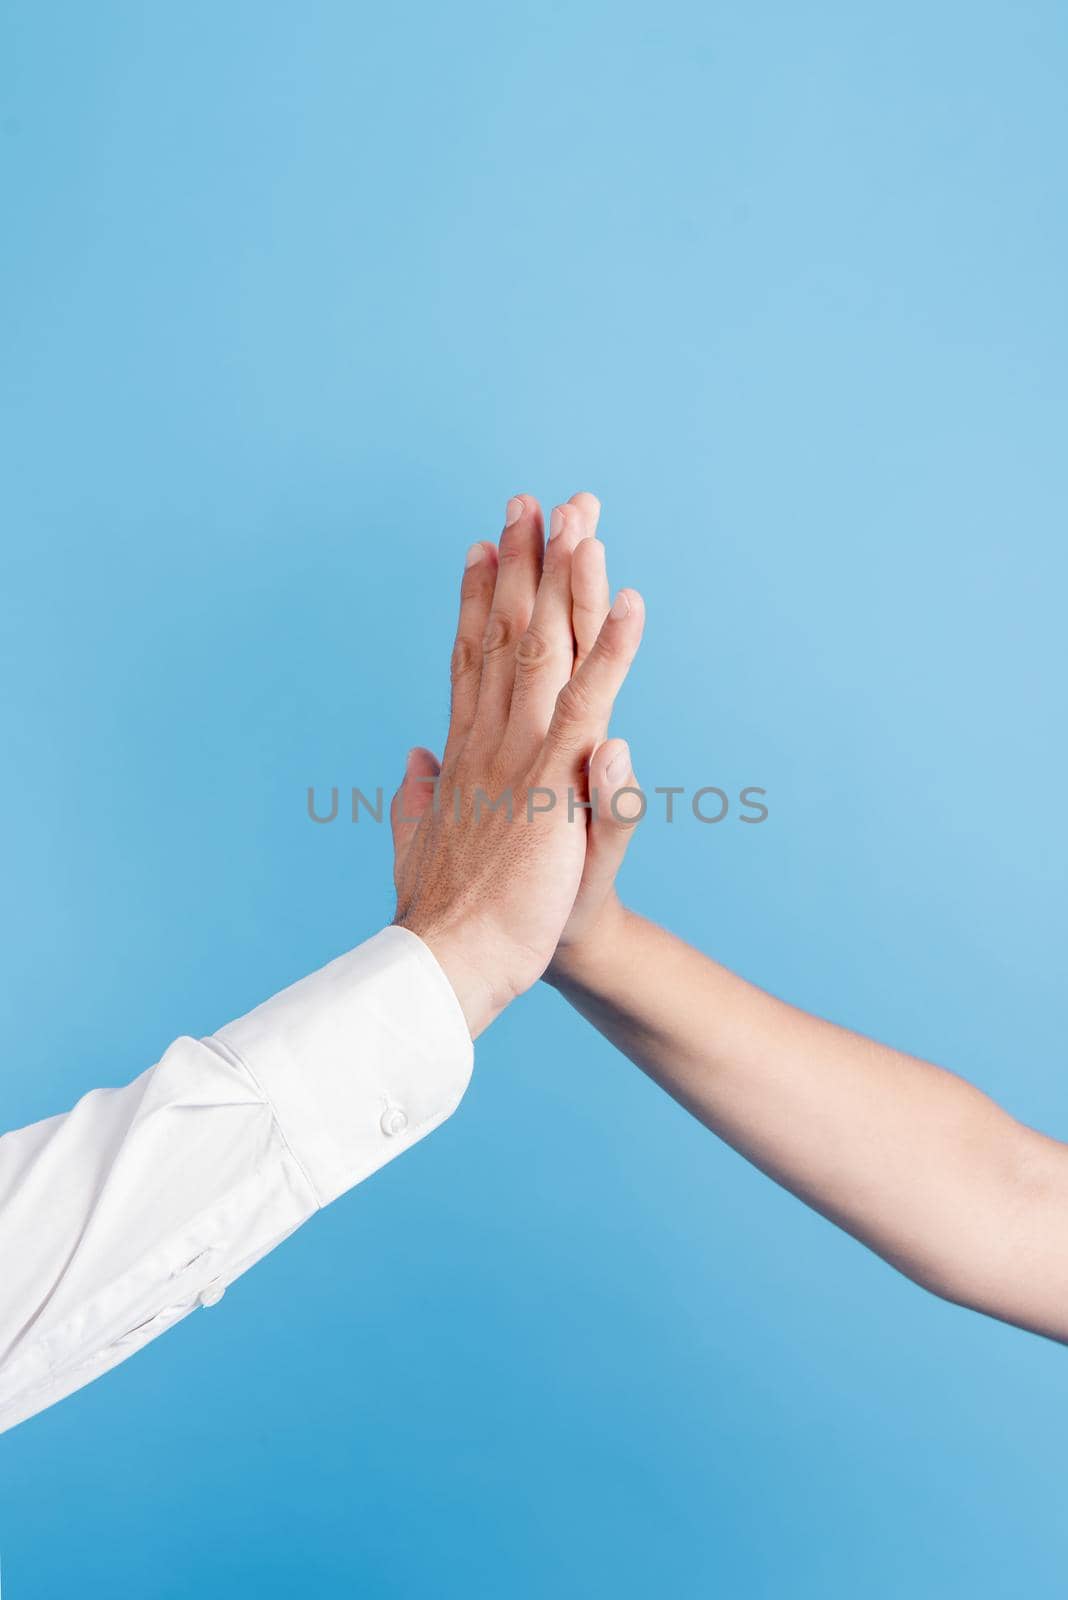 father daughter doing high five. High quality beautiful photo concept by Zahard